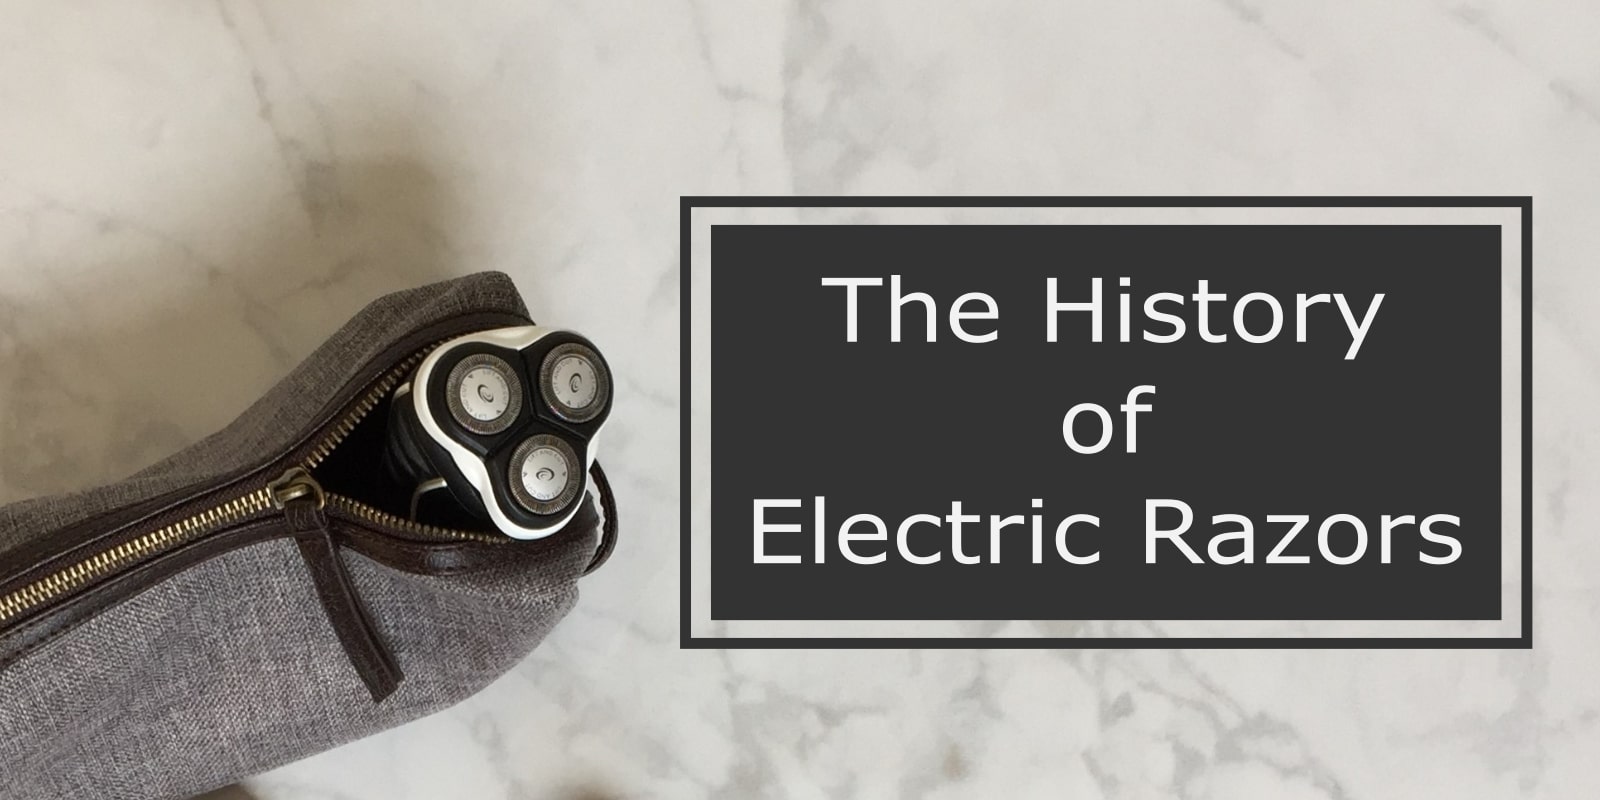 The History of Electric Razors